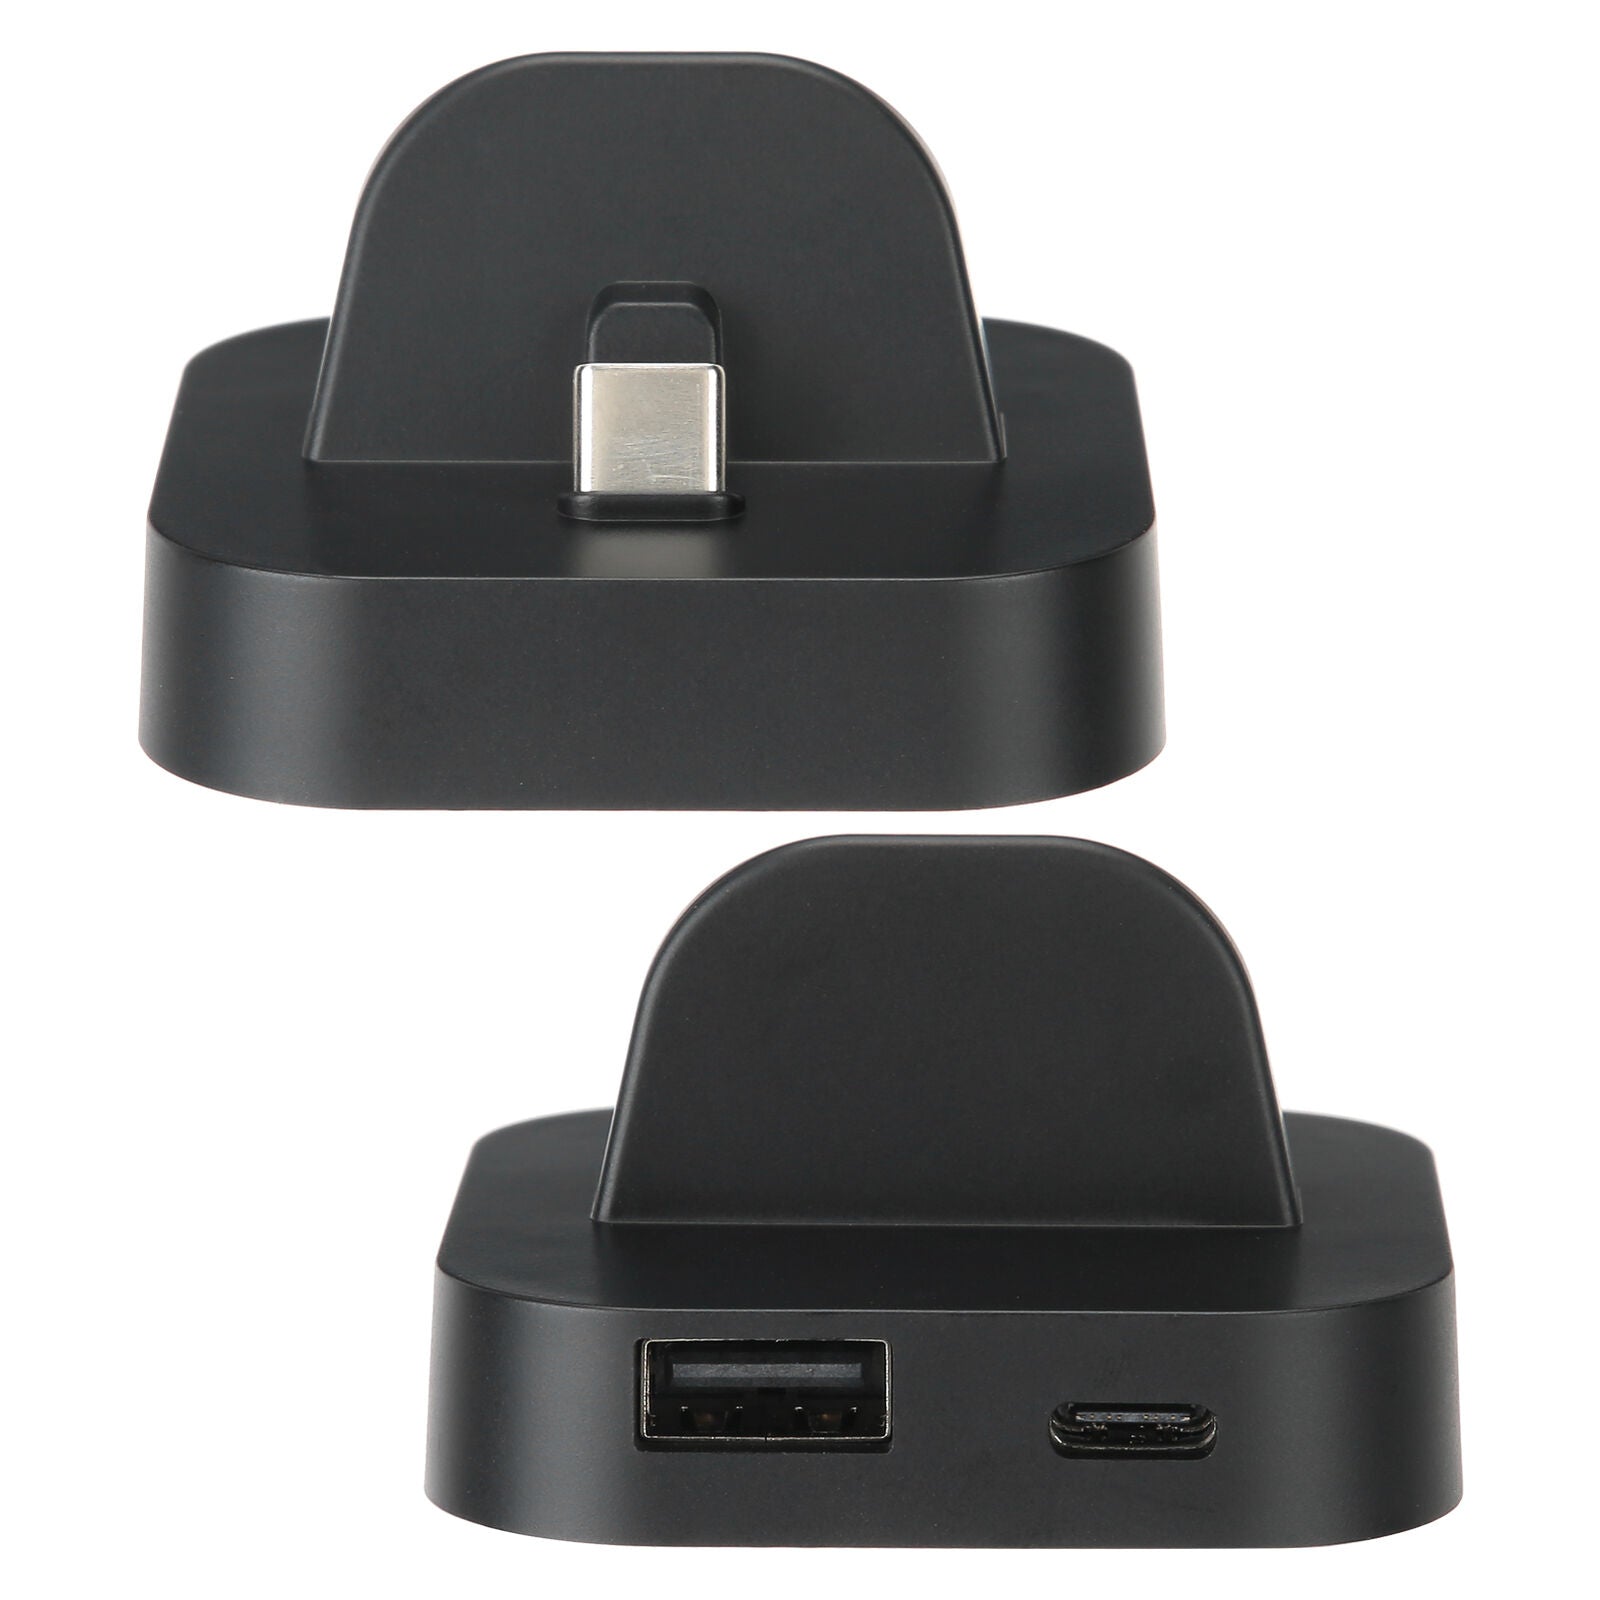 USB Typeâ€‘C Charging Dock Type C Charger For Switch/Lite Easy To Use Novel Design